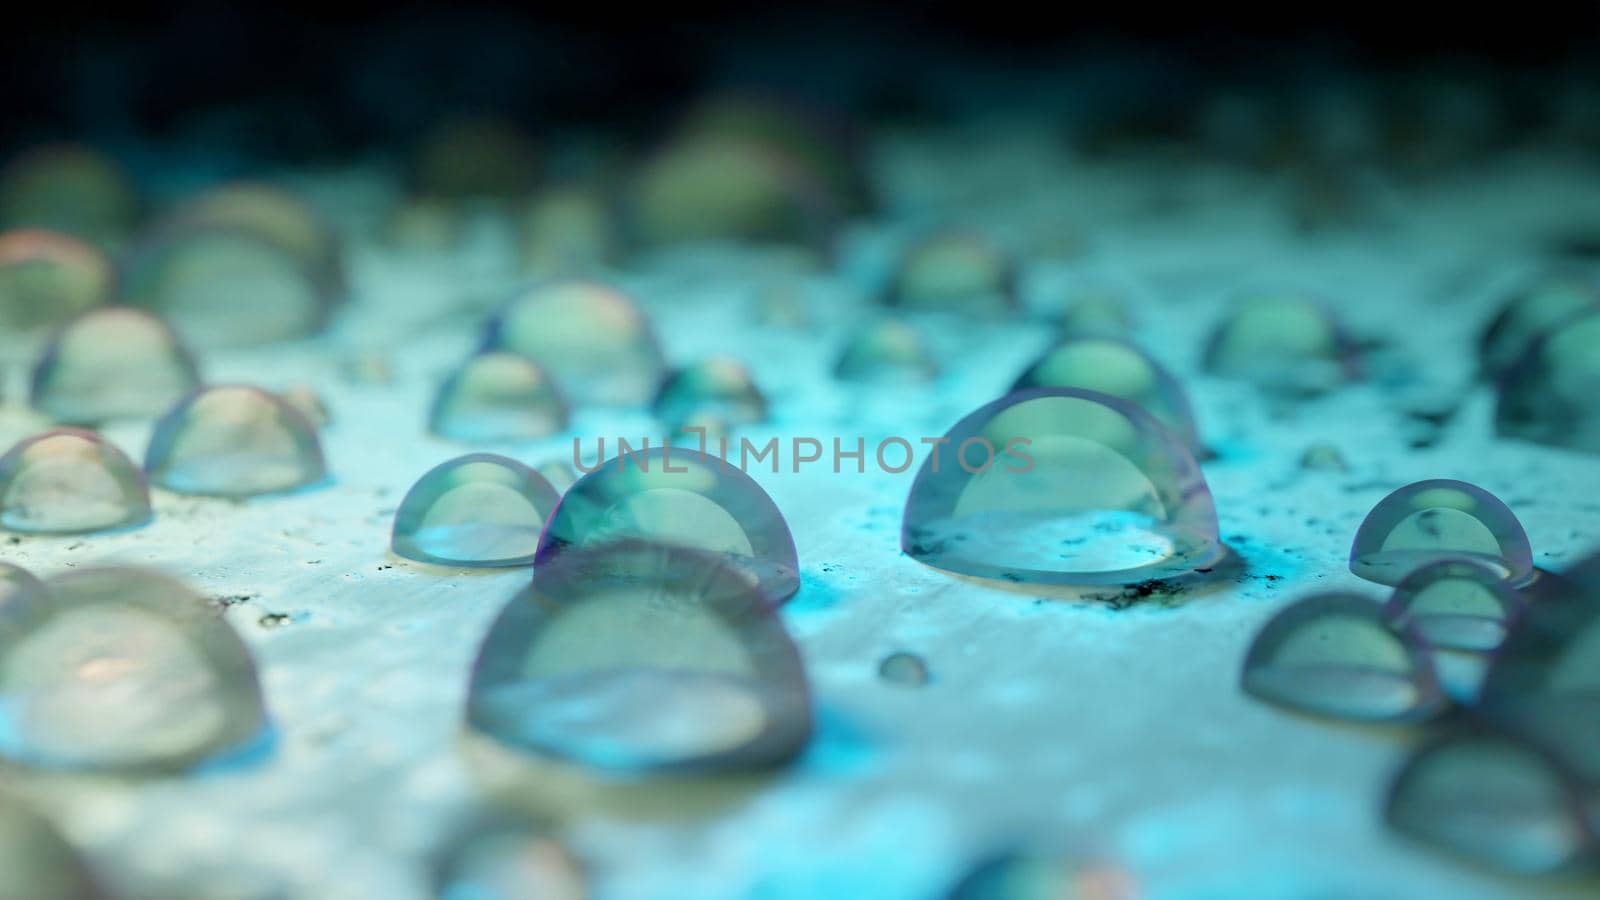 Shiny clear droplets on a reough aquamarine surface, extreme close up. Abstract concept background. Digital 3D render. by hernan_hyper